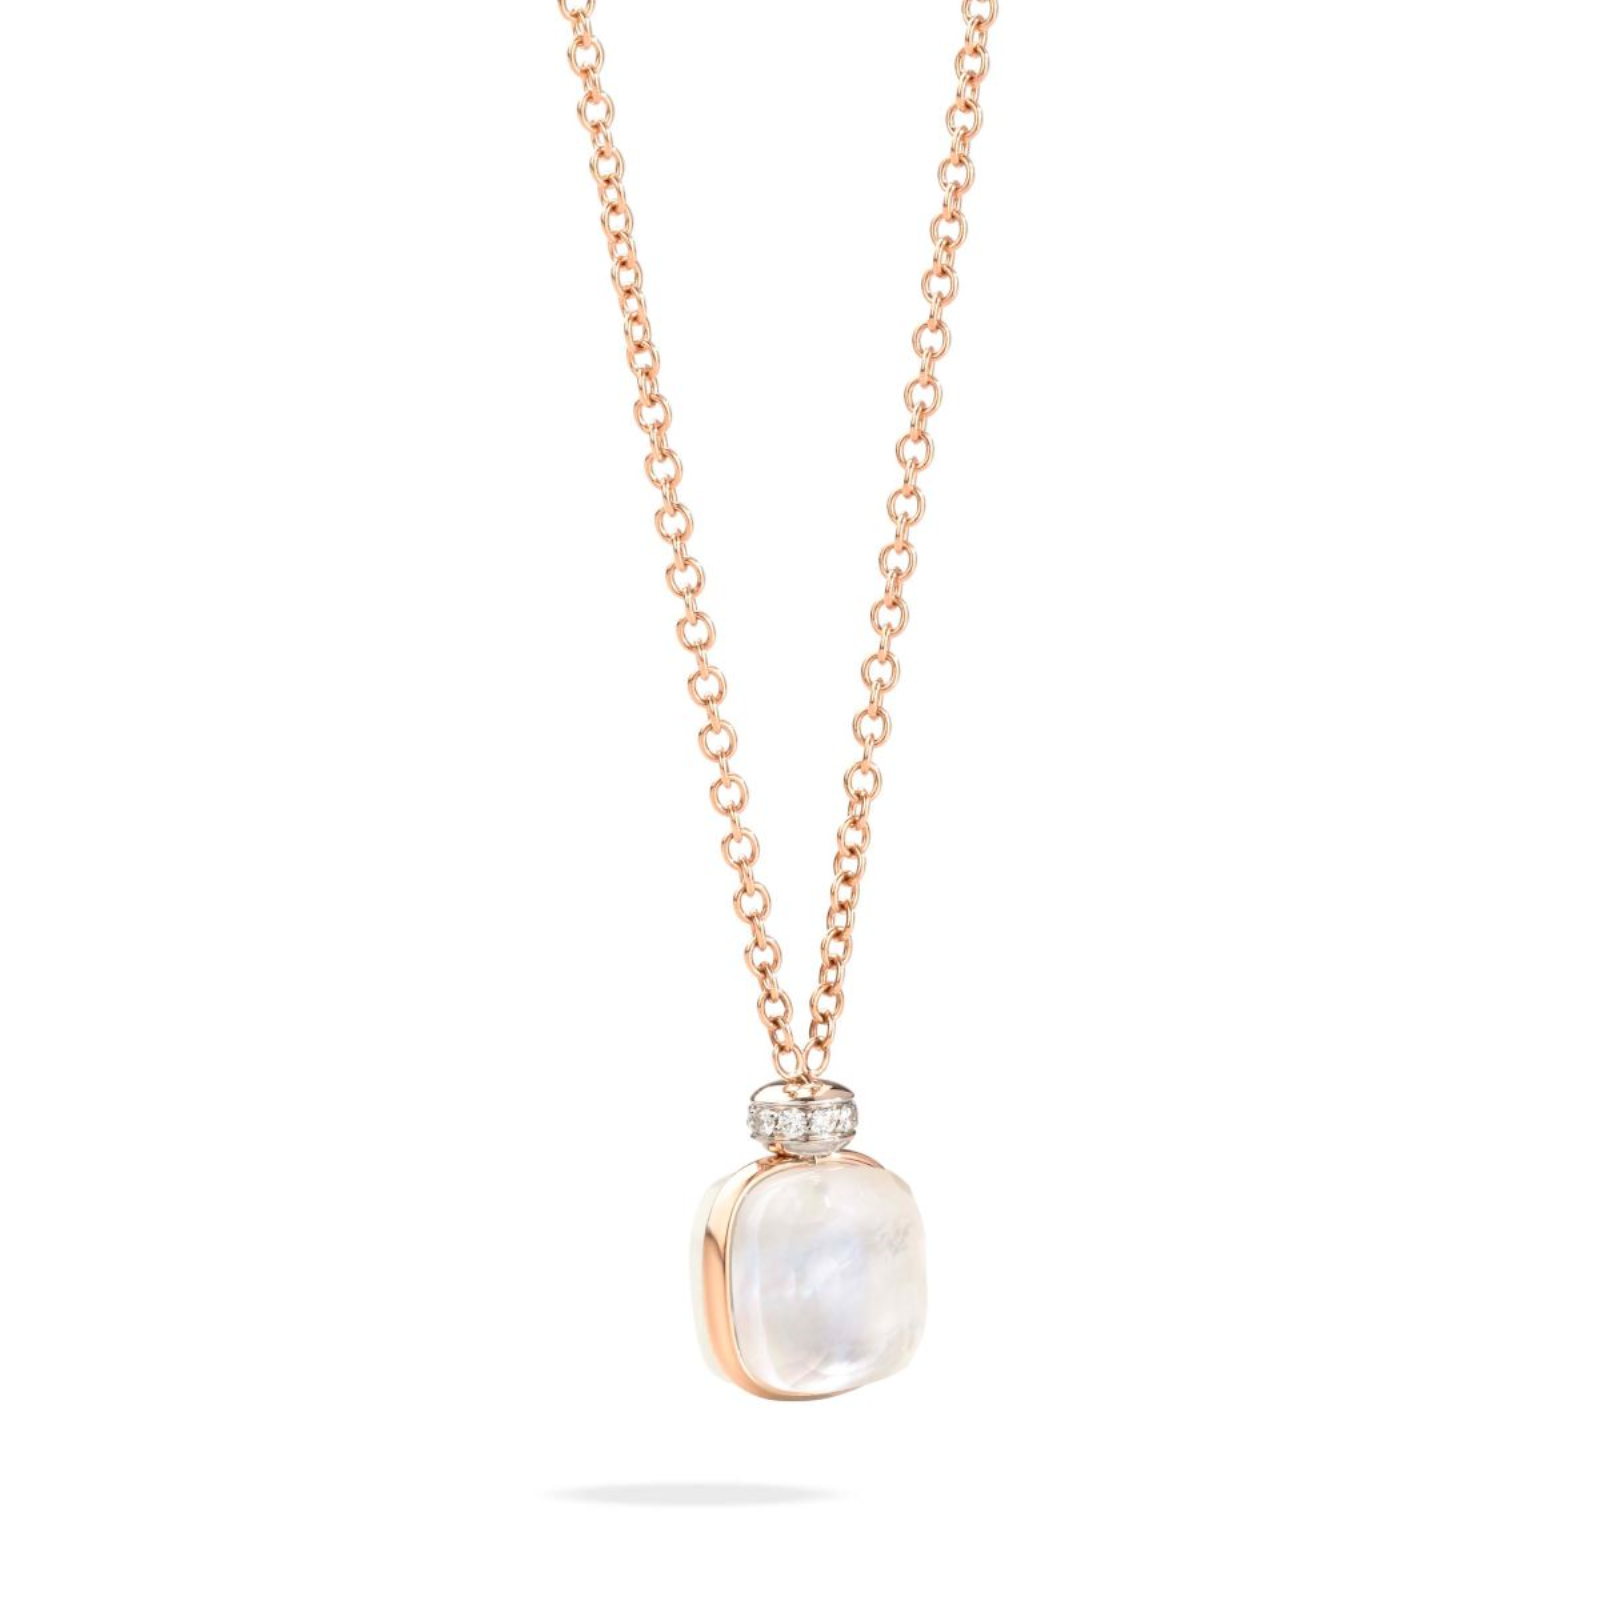 GOLD NUDO MOTHER-OF-PEARL AND DIAMOND PENDANT NECKLACE